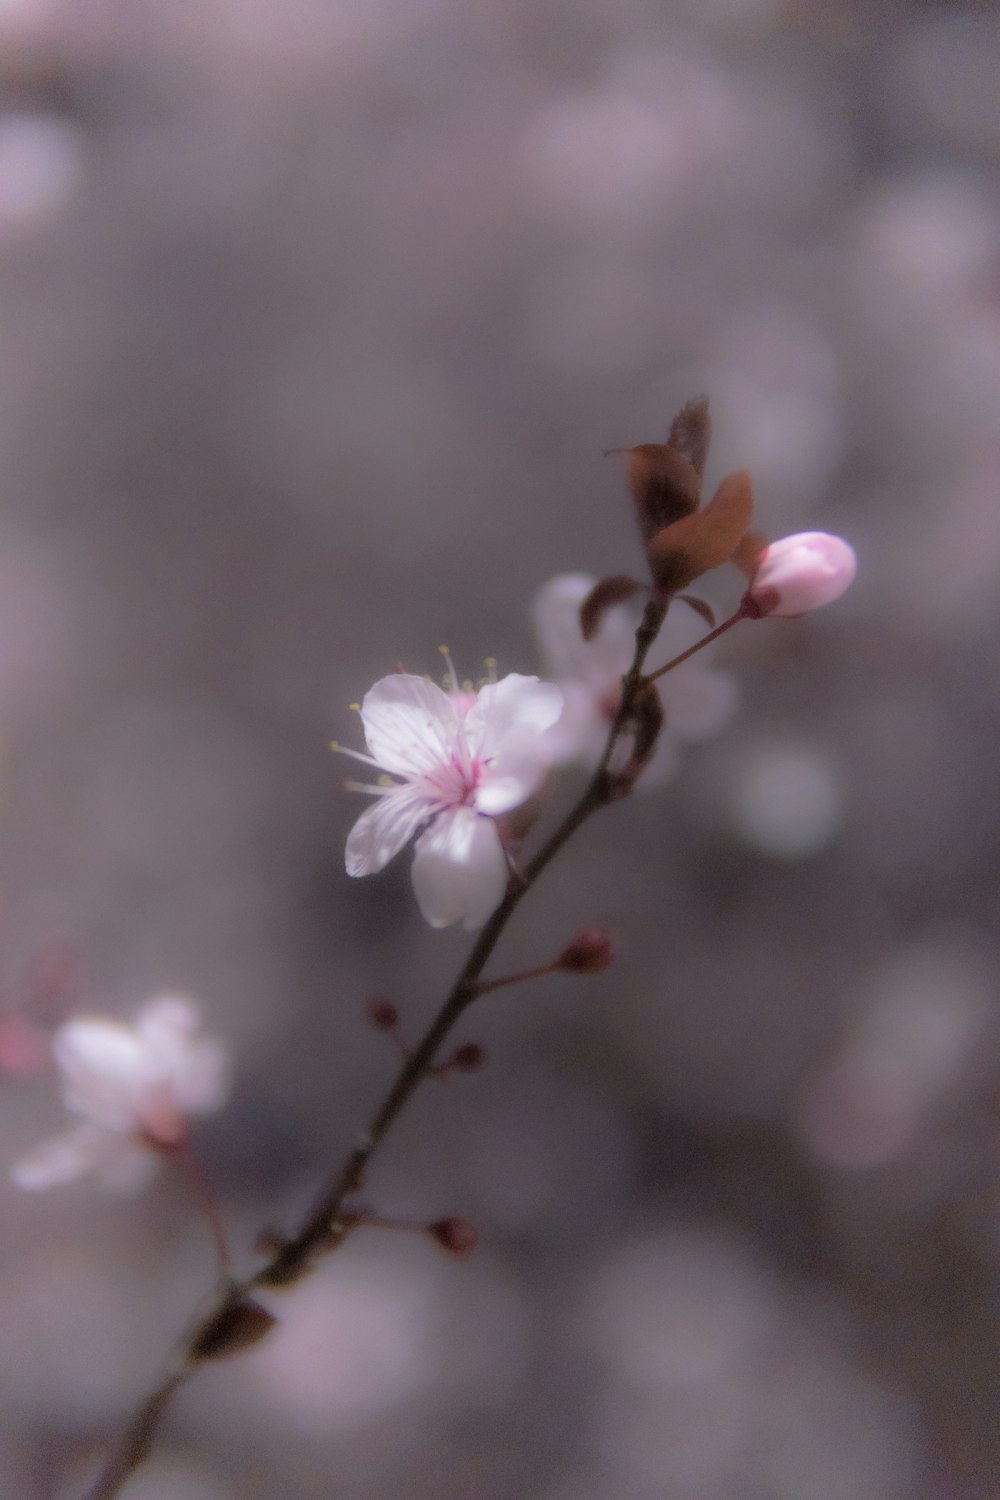 a close up of a flower with blurry background